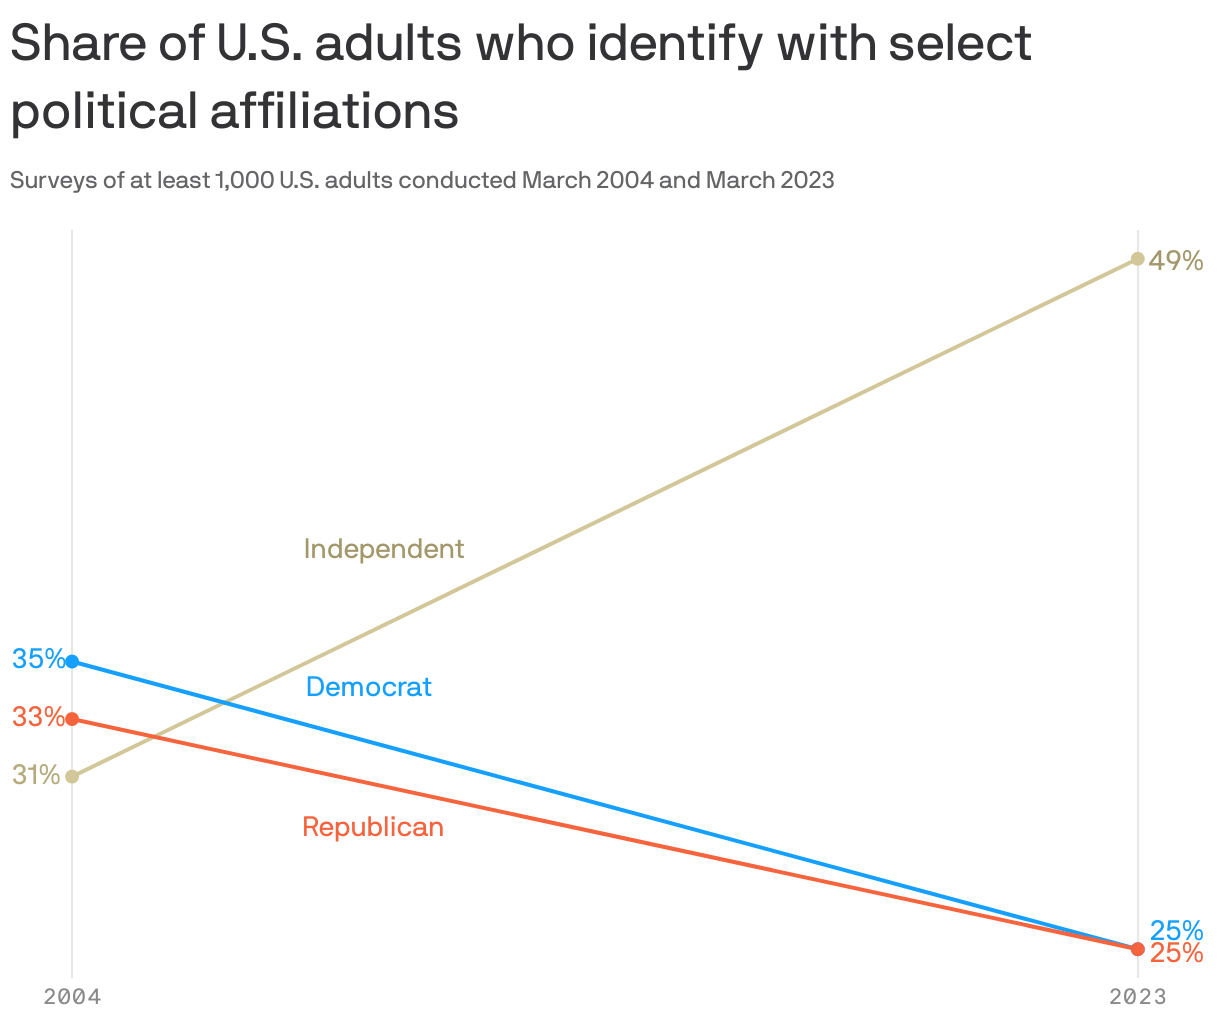 Share of U.S. adults who identify with select political affiliations